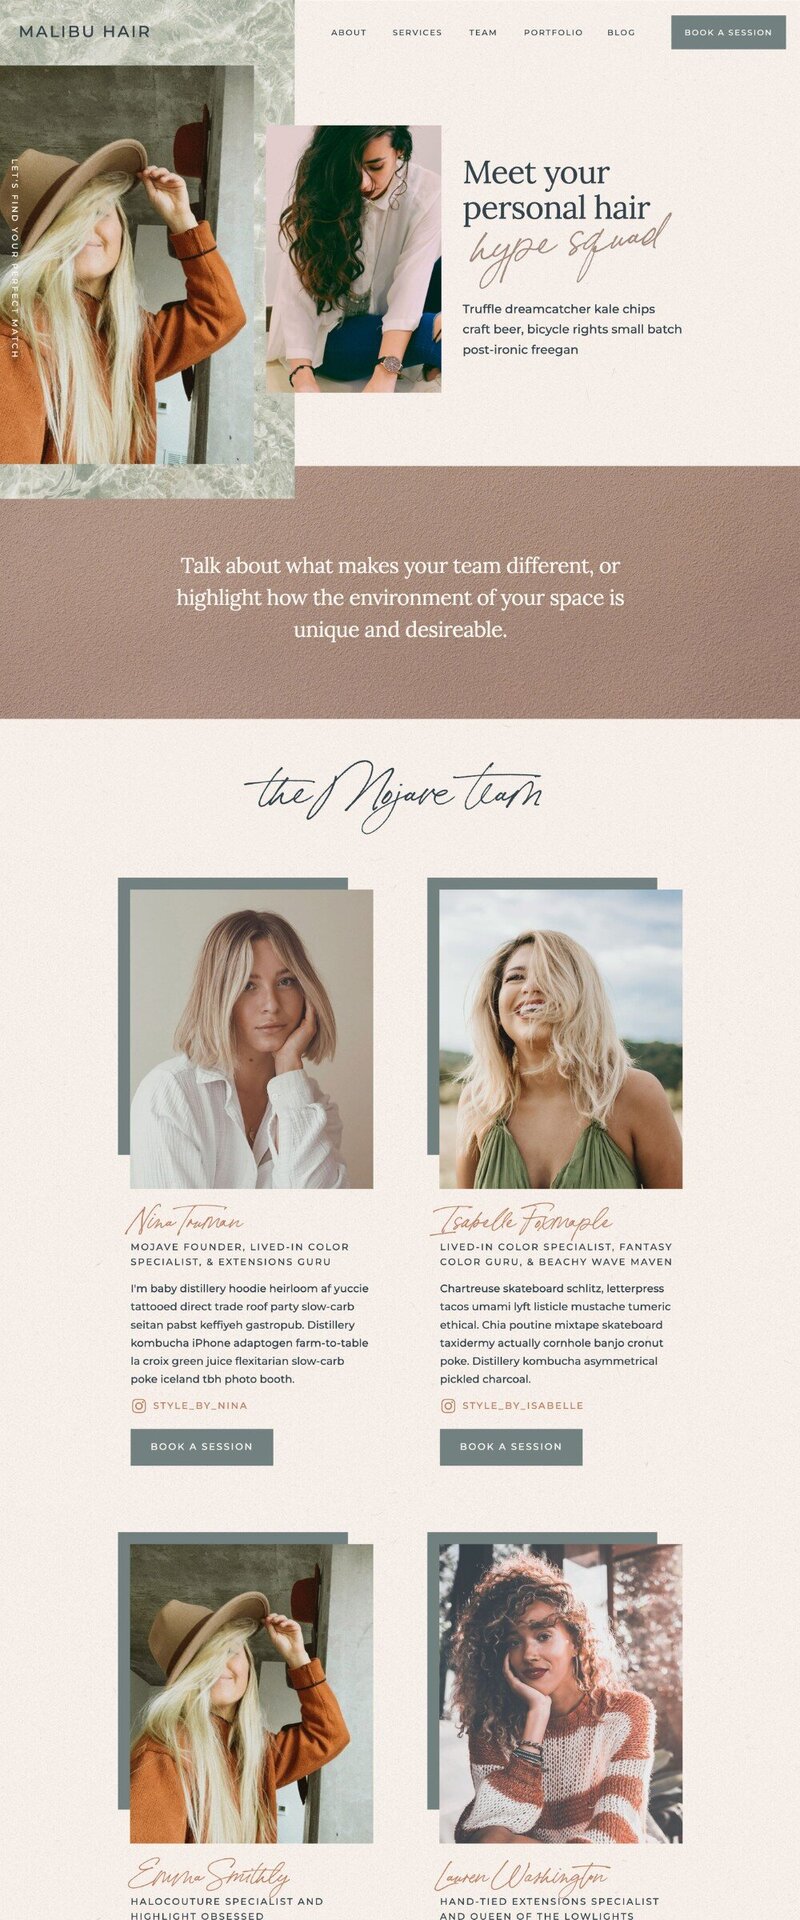 ShowIt Website Template for Hair Stylists and Salons - Malibu - Team Page